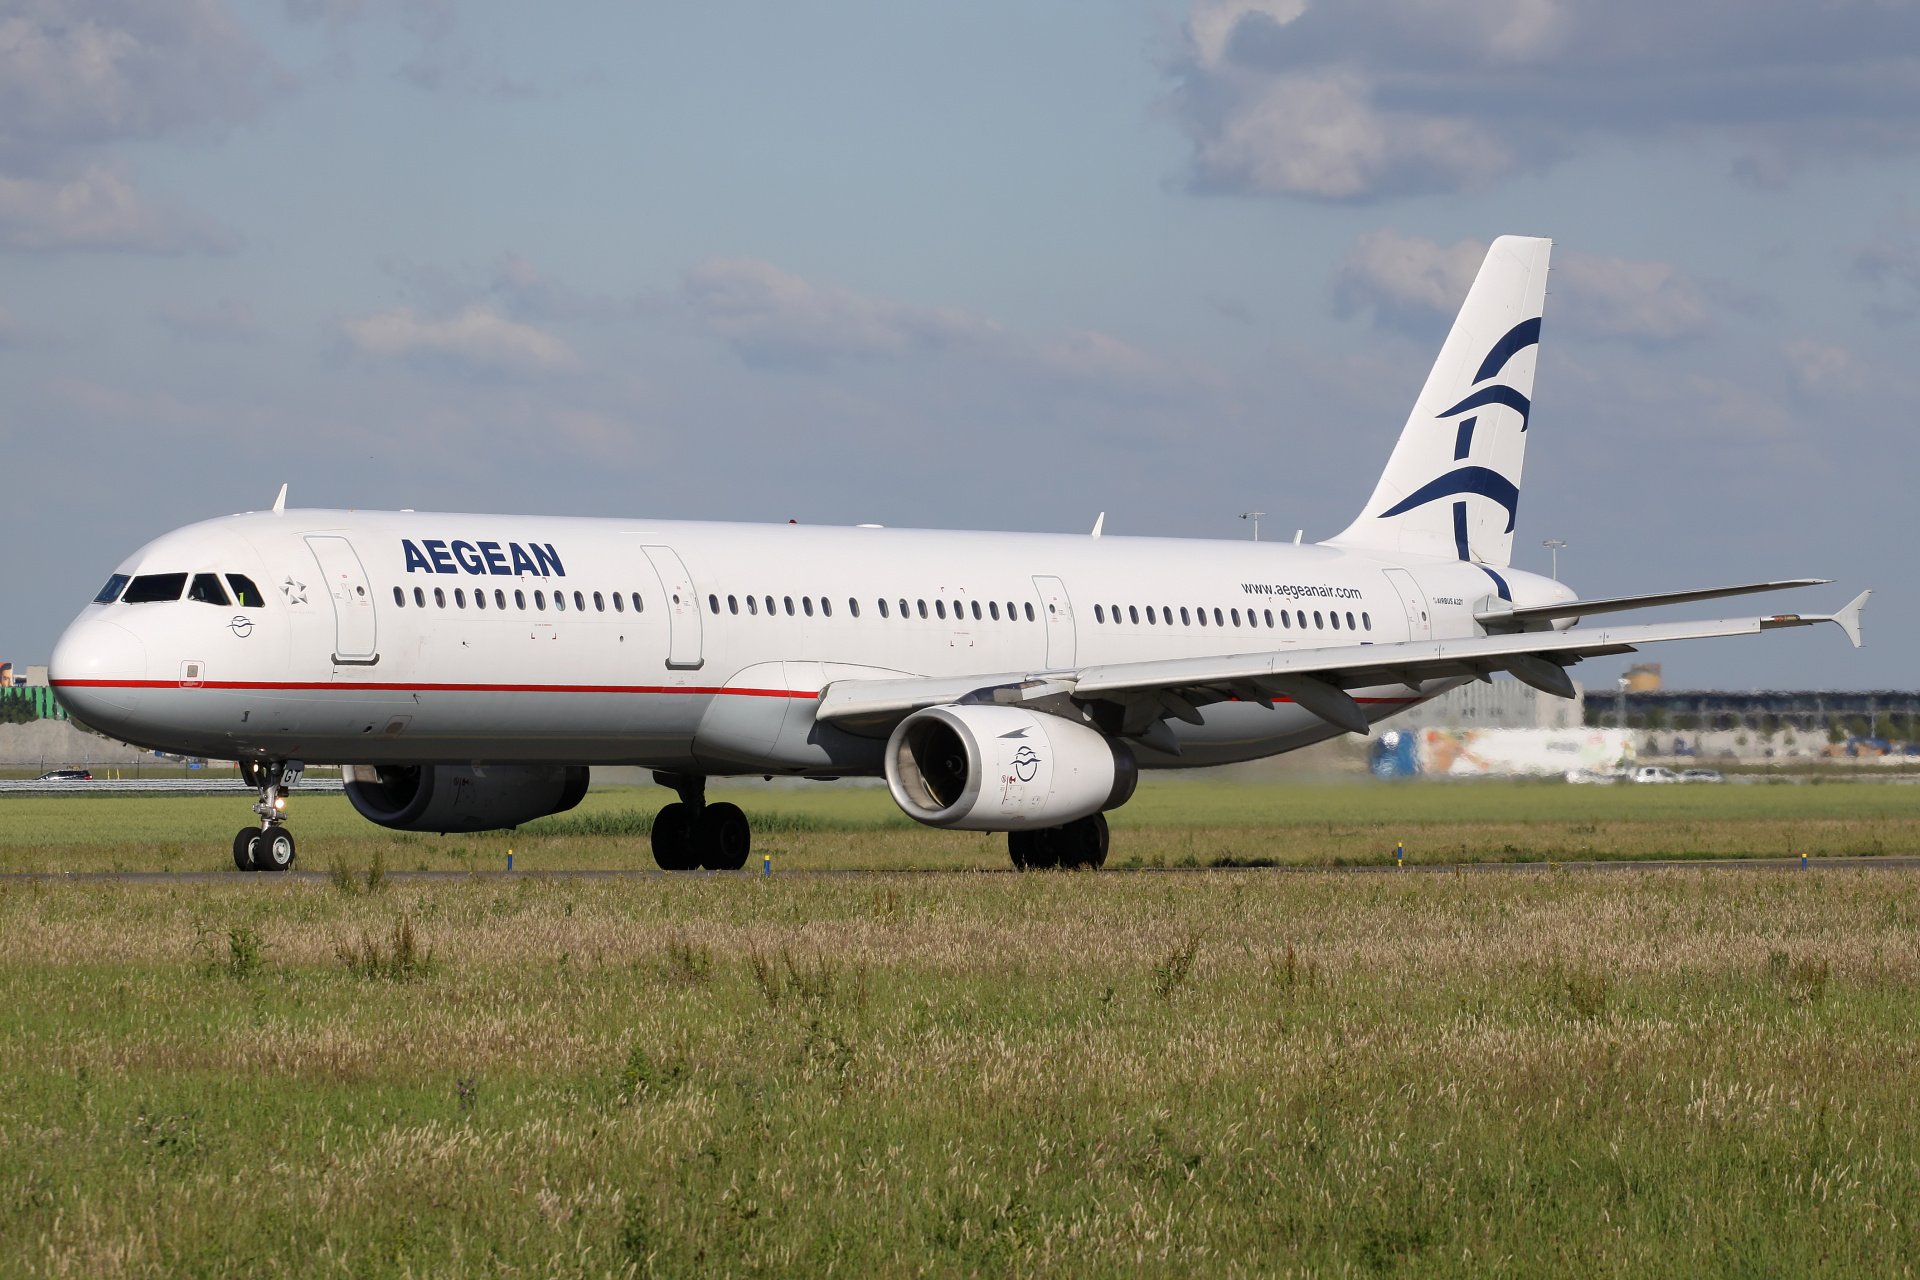 SX-DGT, Aegean Airlines (Aircraft » Schiphol Spotting » Airbus A321-200)